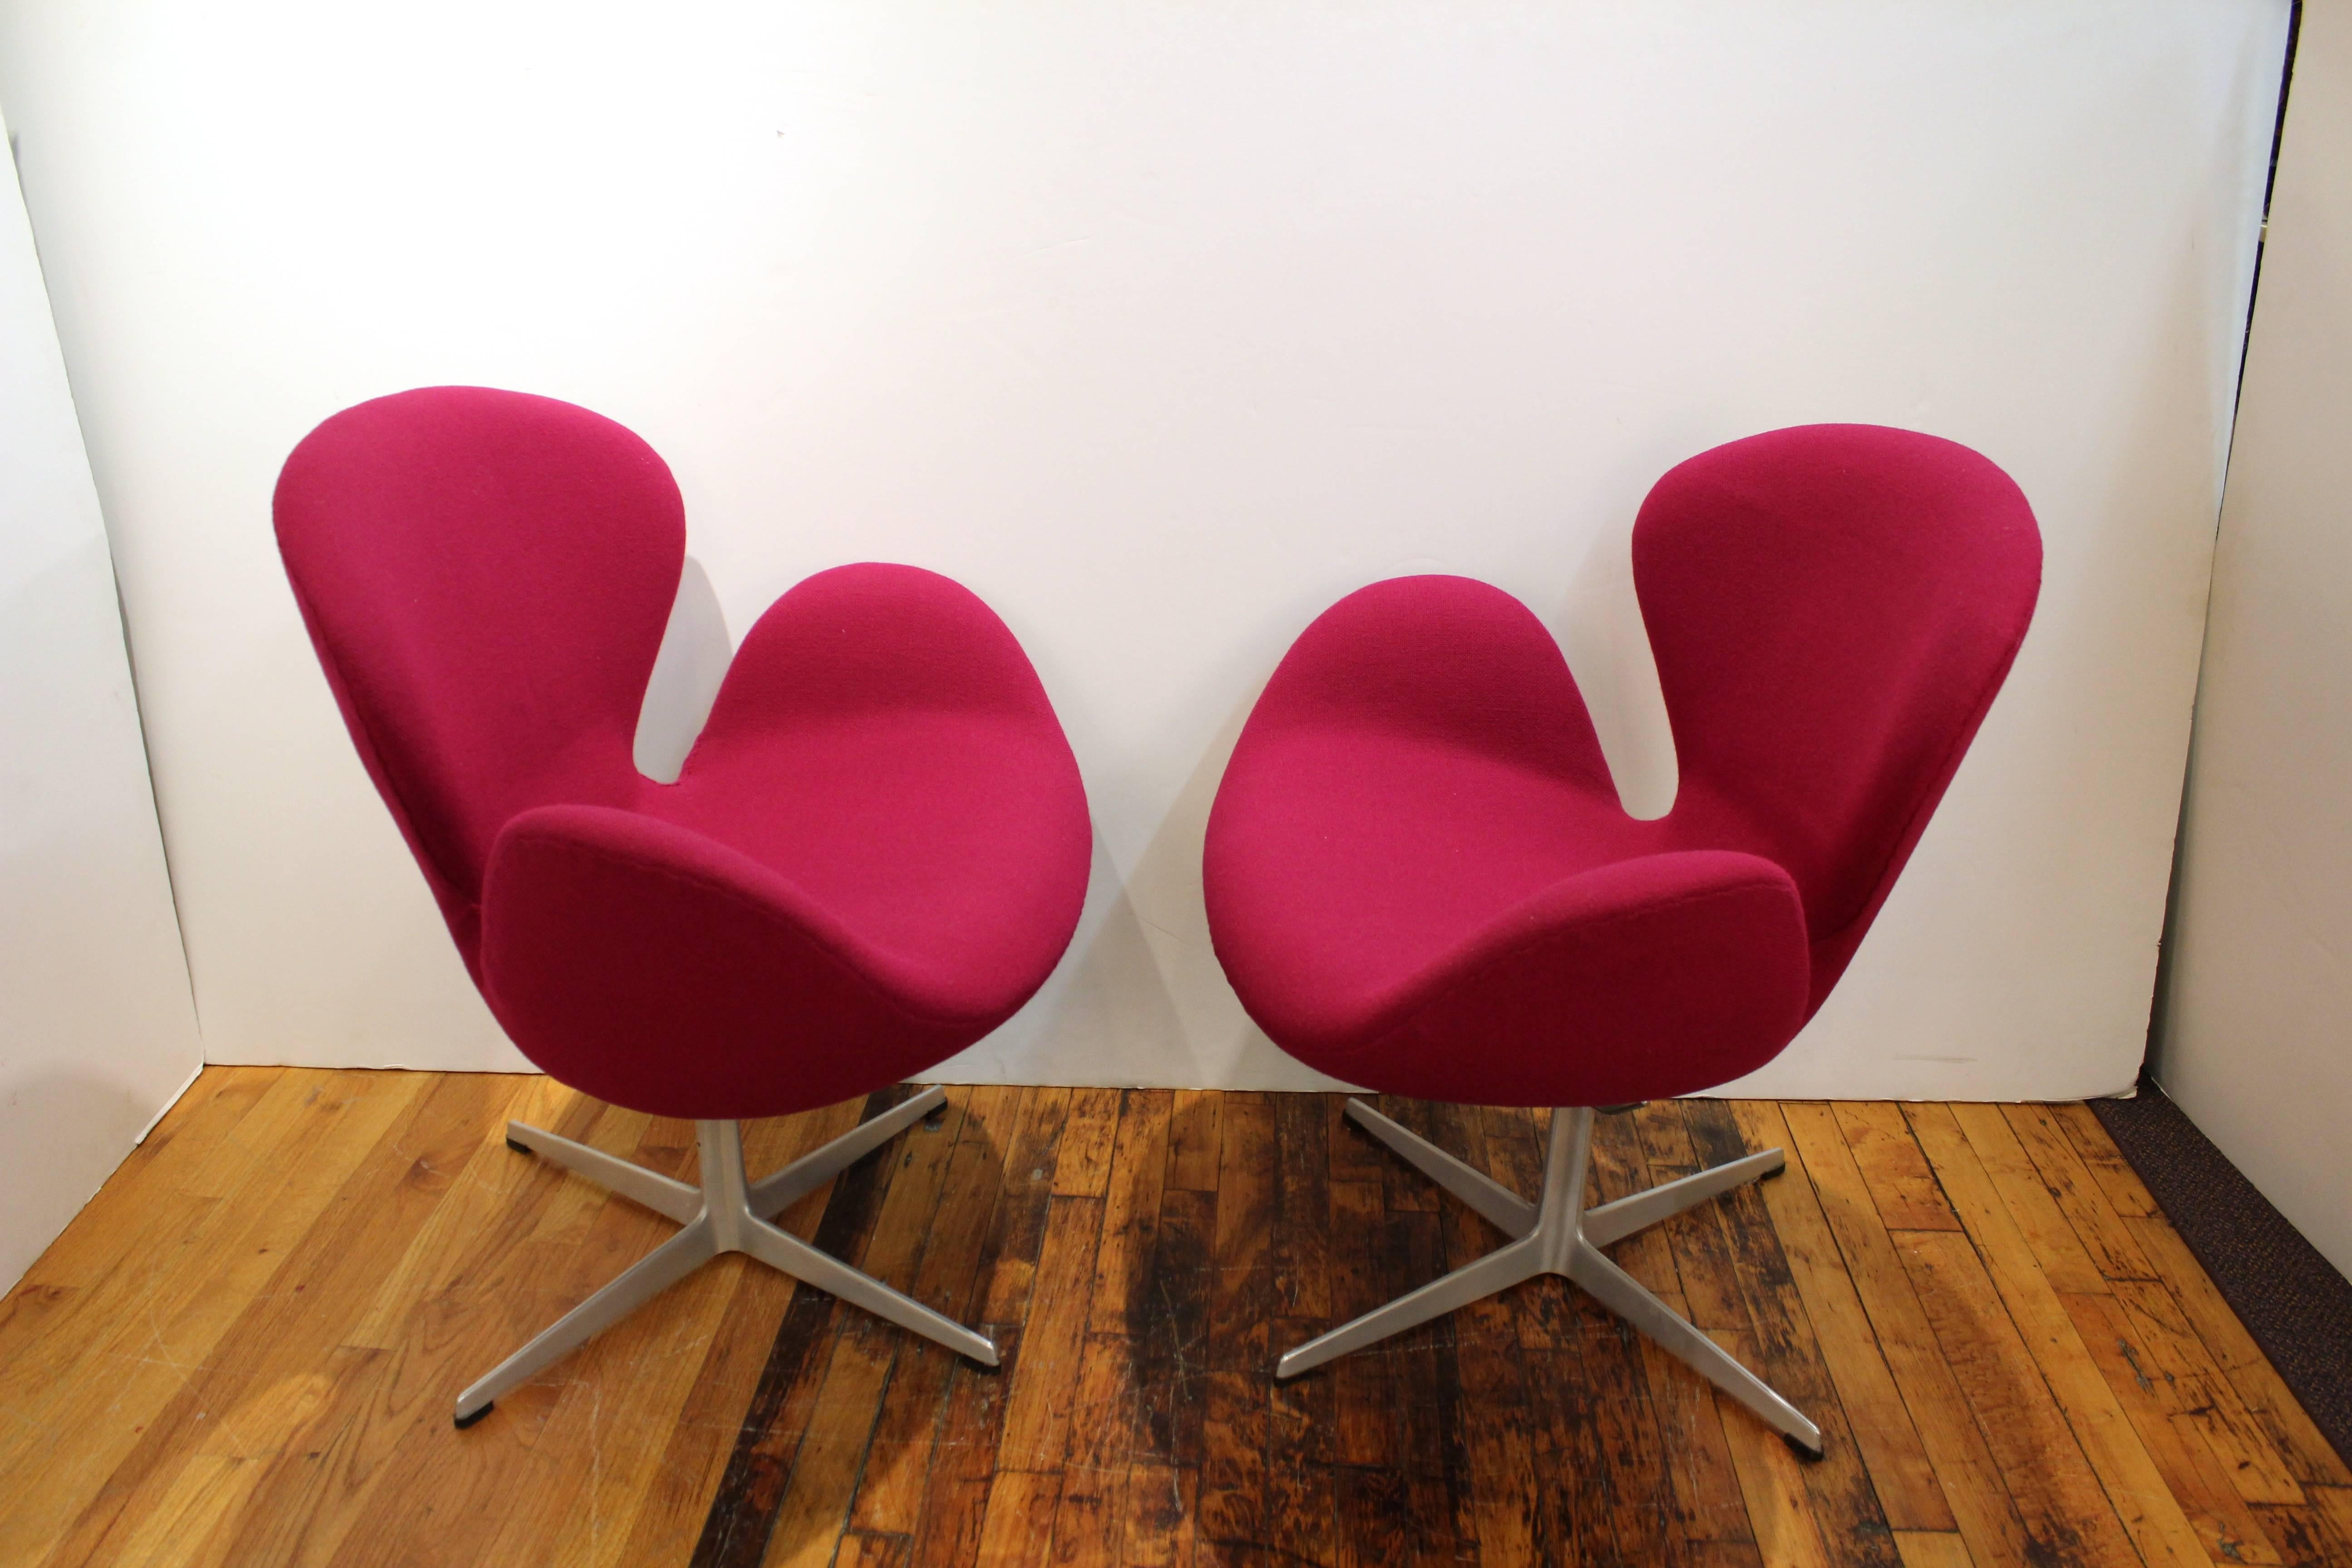 Arne Jacobsen mid-century modern swan chairs with a swivel base produced for Knoll newly reupholstered in bright pink fabric. This chair is in good vintage condition and has wear consistent with age and use. 